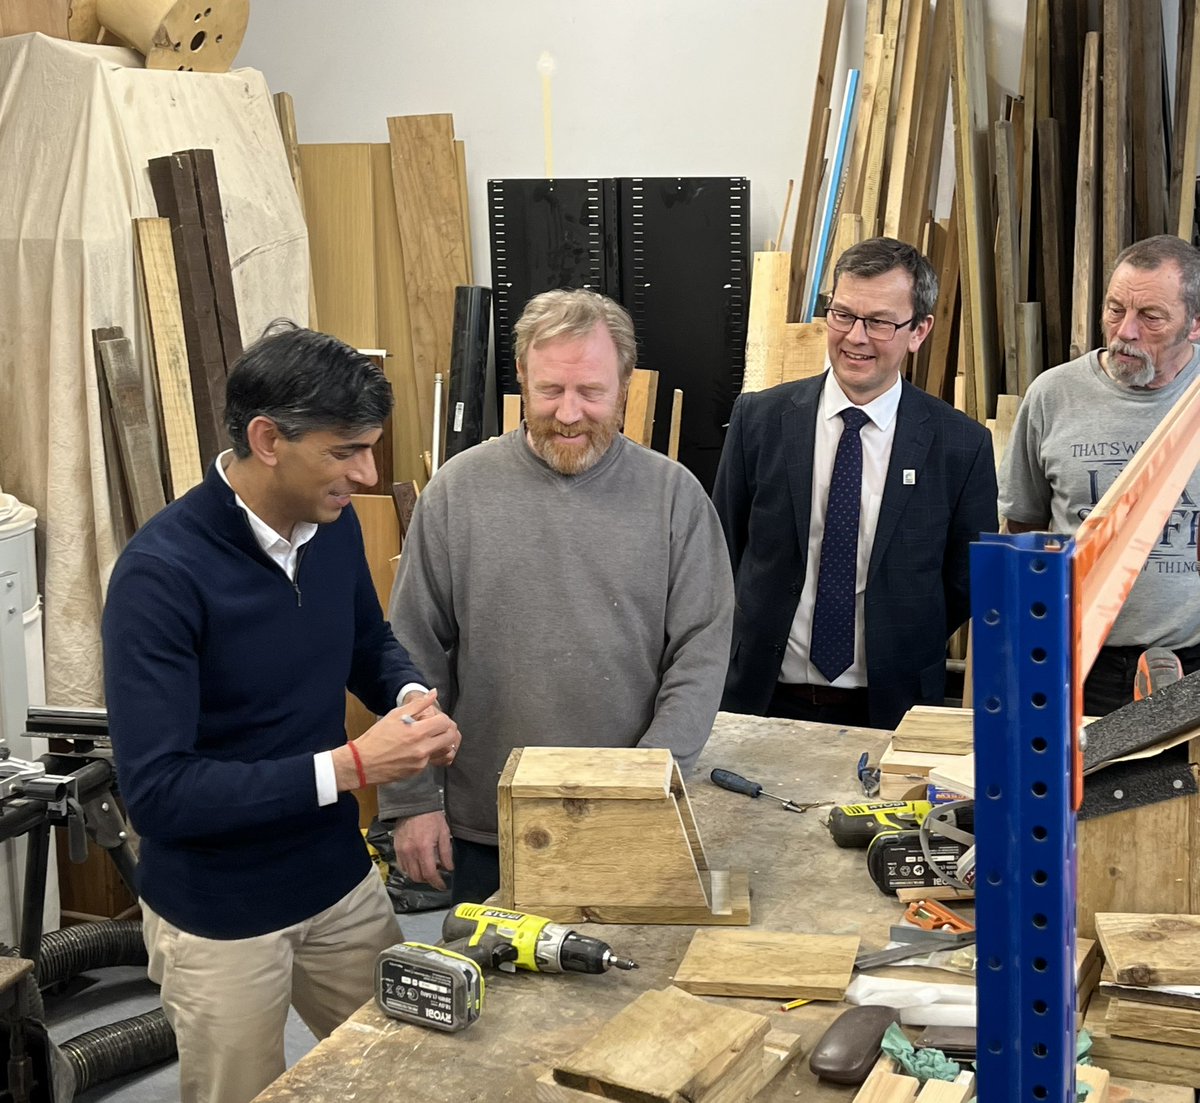 UK MEN'S SHEDS AWARDS The brilliant @UKMensSheds have opened nominations for their Shed Awards. It will be hosted in @UKParliament @CommonsSpeaker - please do take part. Men's Sheds play such a vital role in supporting the mental health of men and supporting their community.…